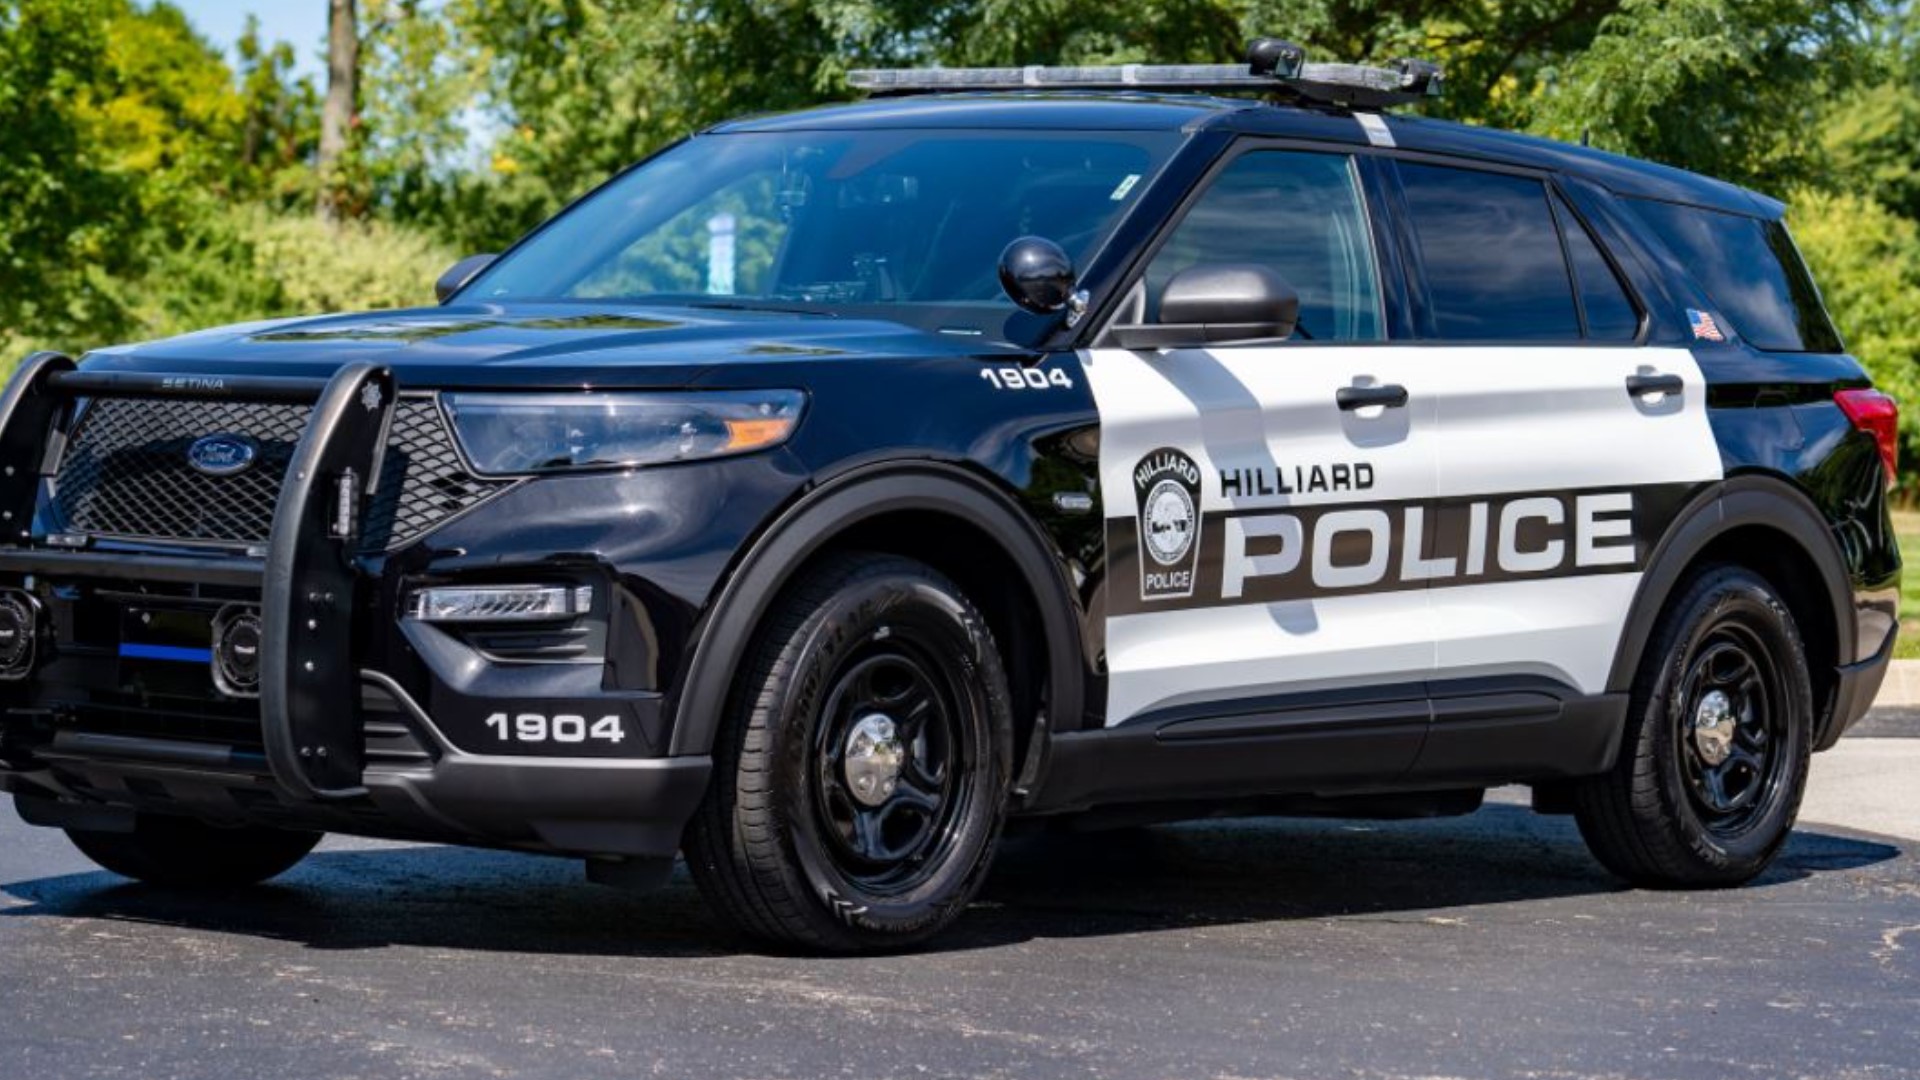 Residents called police Friday morning saying it looked like someone was going through cars in the area of Hilliard Davidson High School and the police department.